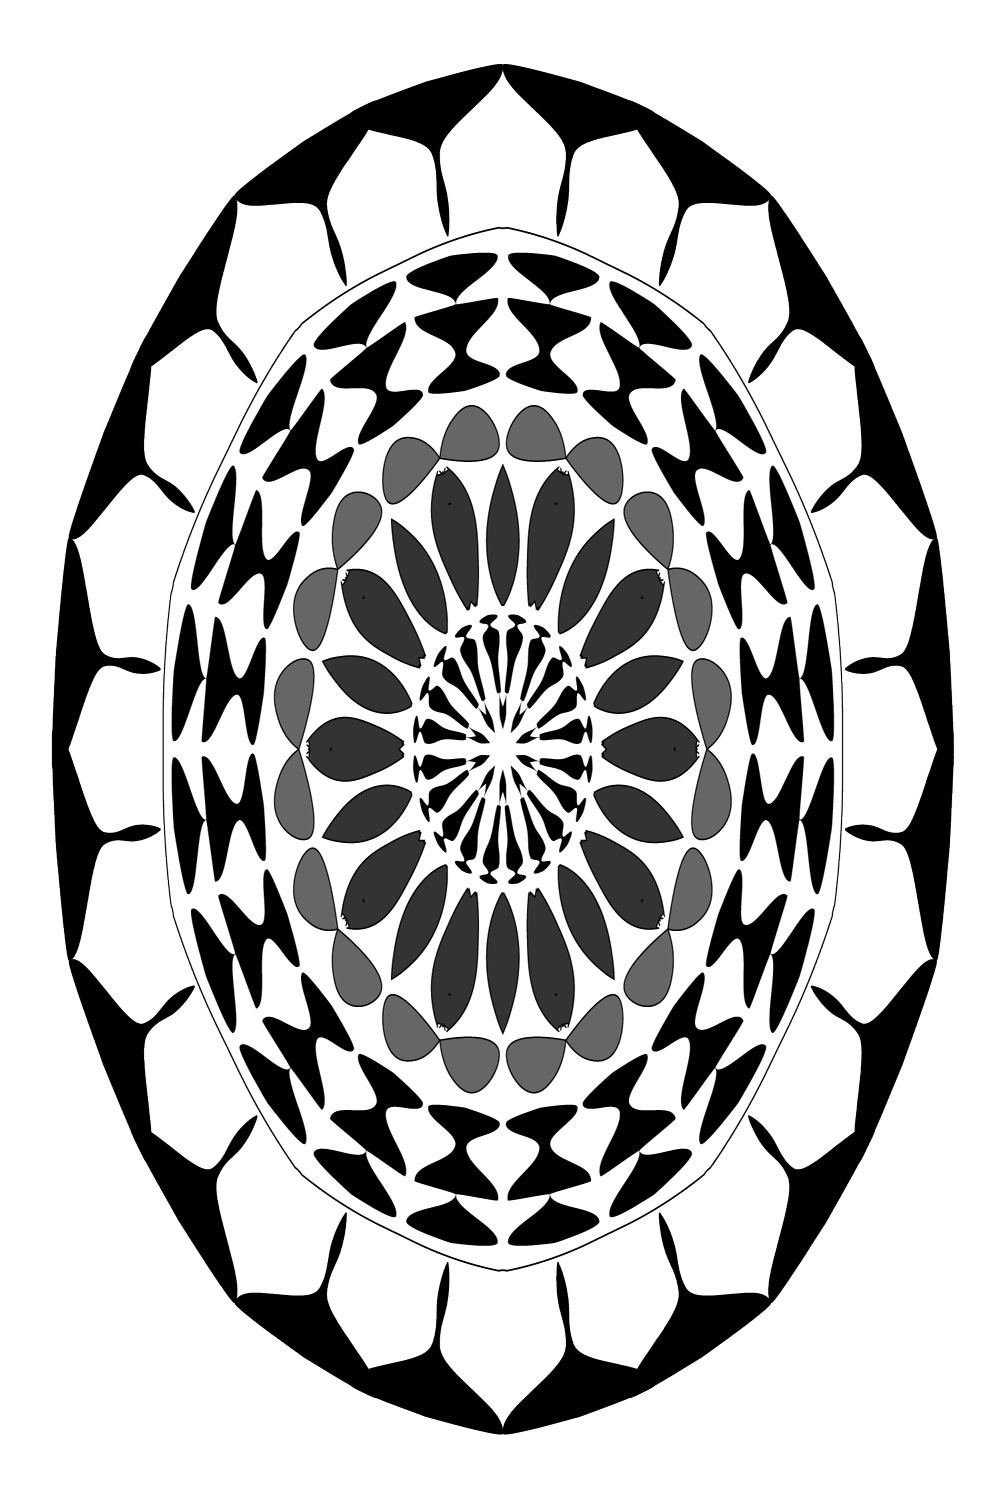 Mandala-Art-with-lotus-flower-in-black-and-white pinterest preview image.